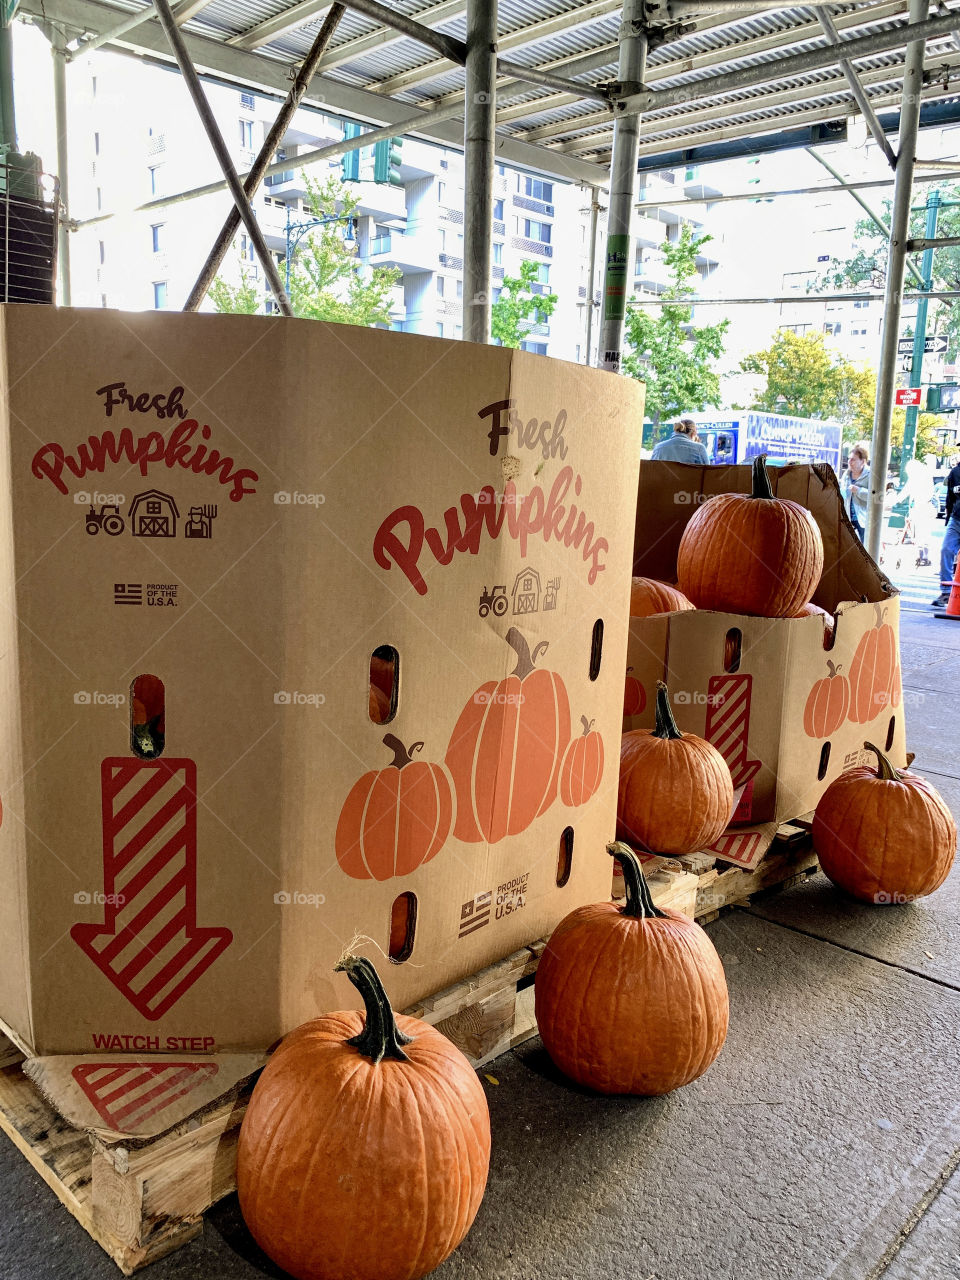 Fresh pumpkins outside and inside the big boxes. With the background of building, scaffolding and people walking.